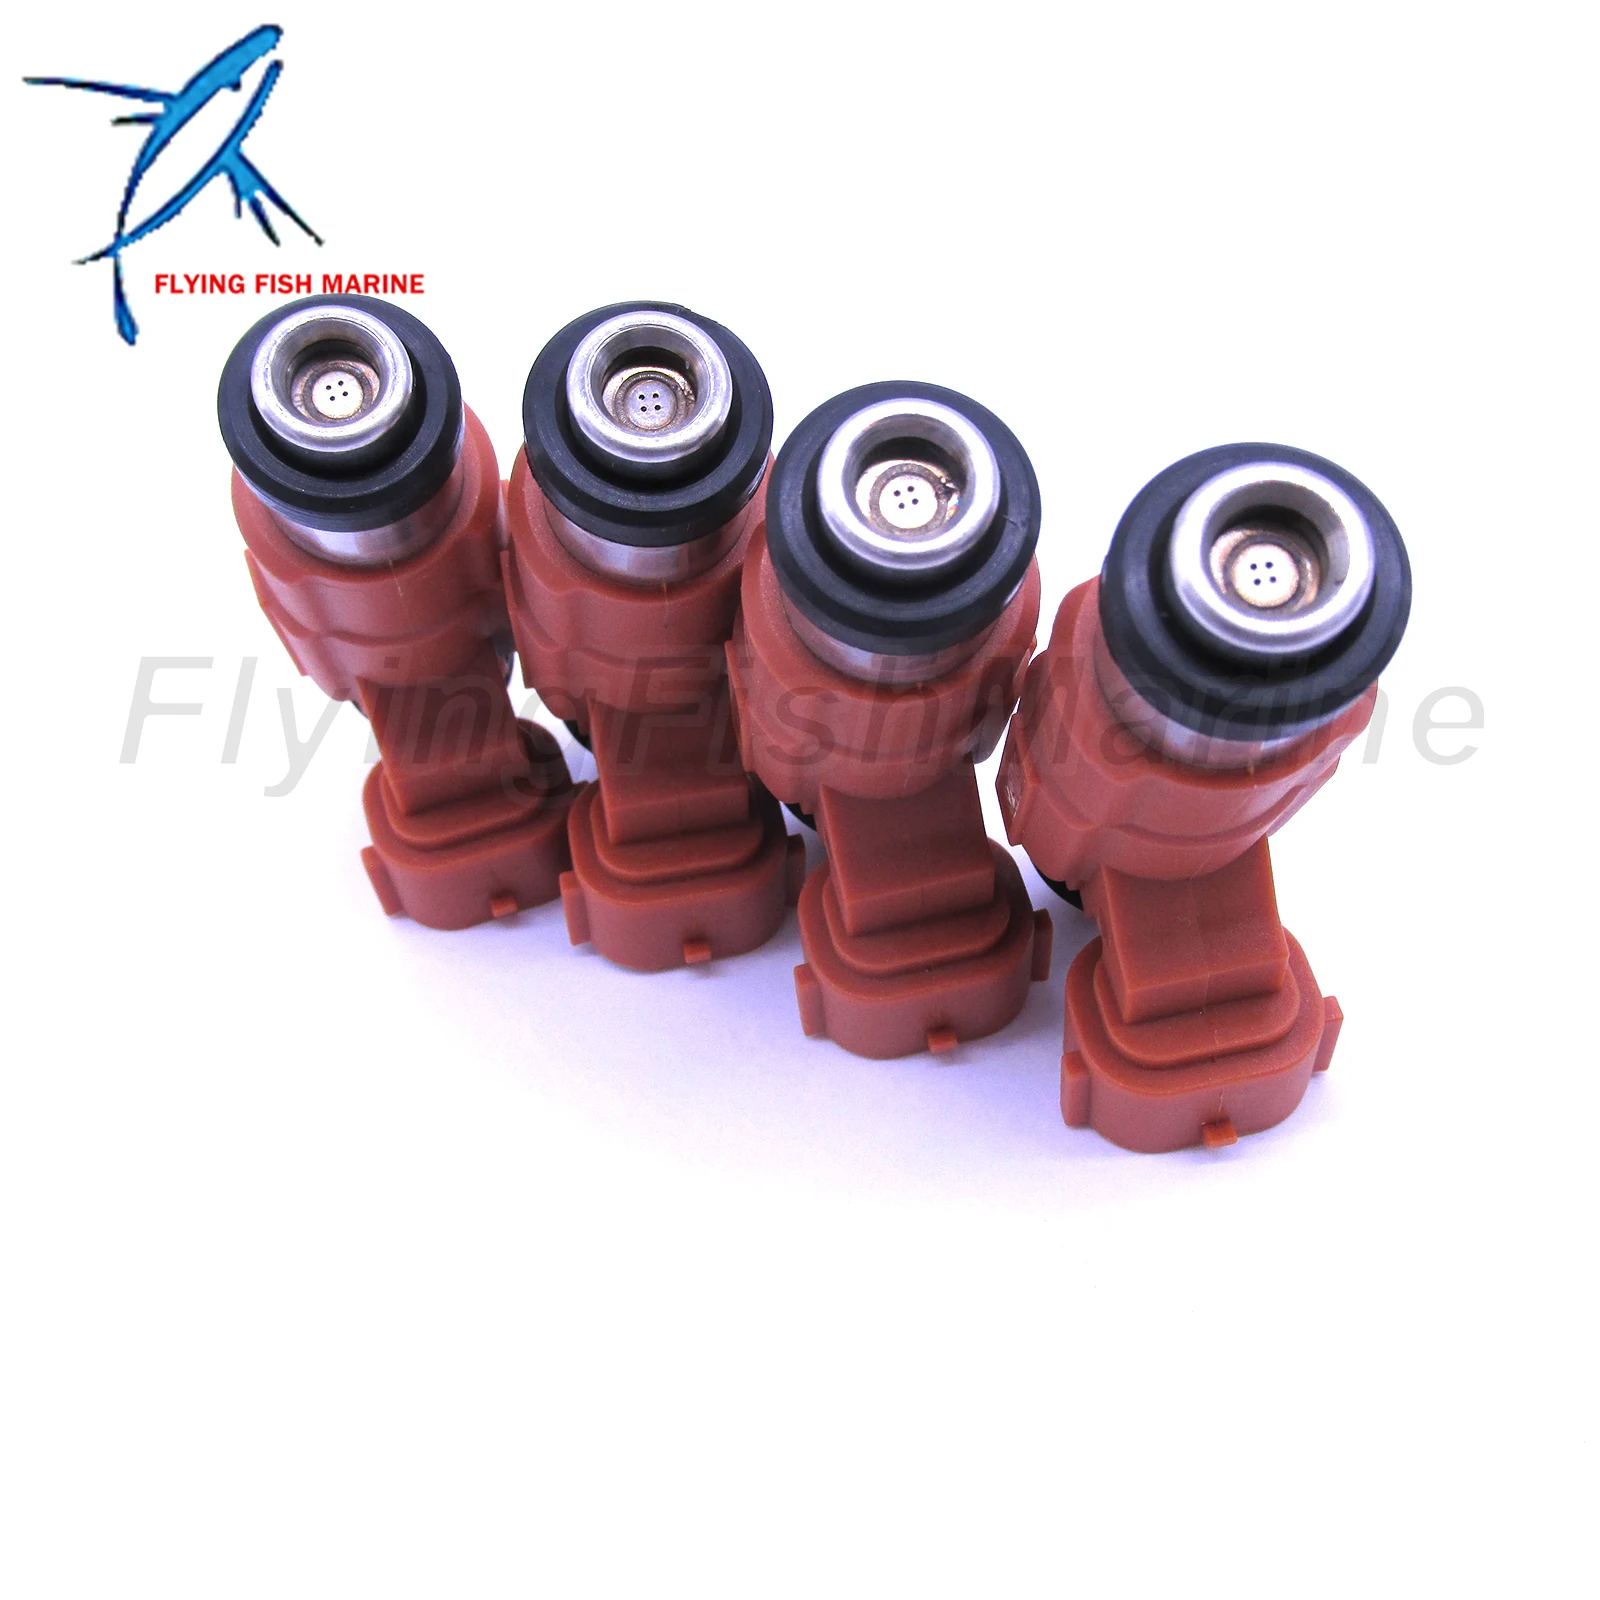 

Fuel Injector INP771 CDH210 68V-8A360-00 842-12223 15710-65D00 for Yamaha Outboard 115 HP Marine for Chevrolet Chrysler Suzuki